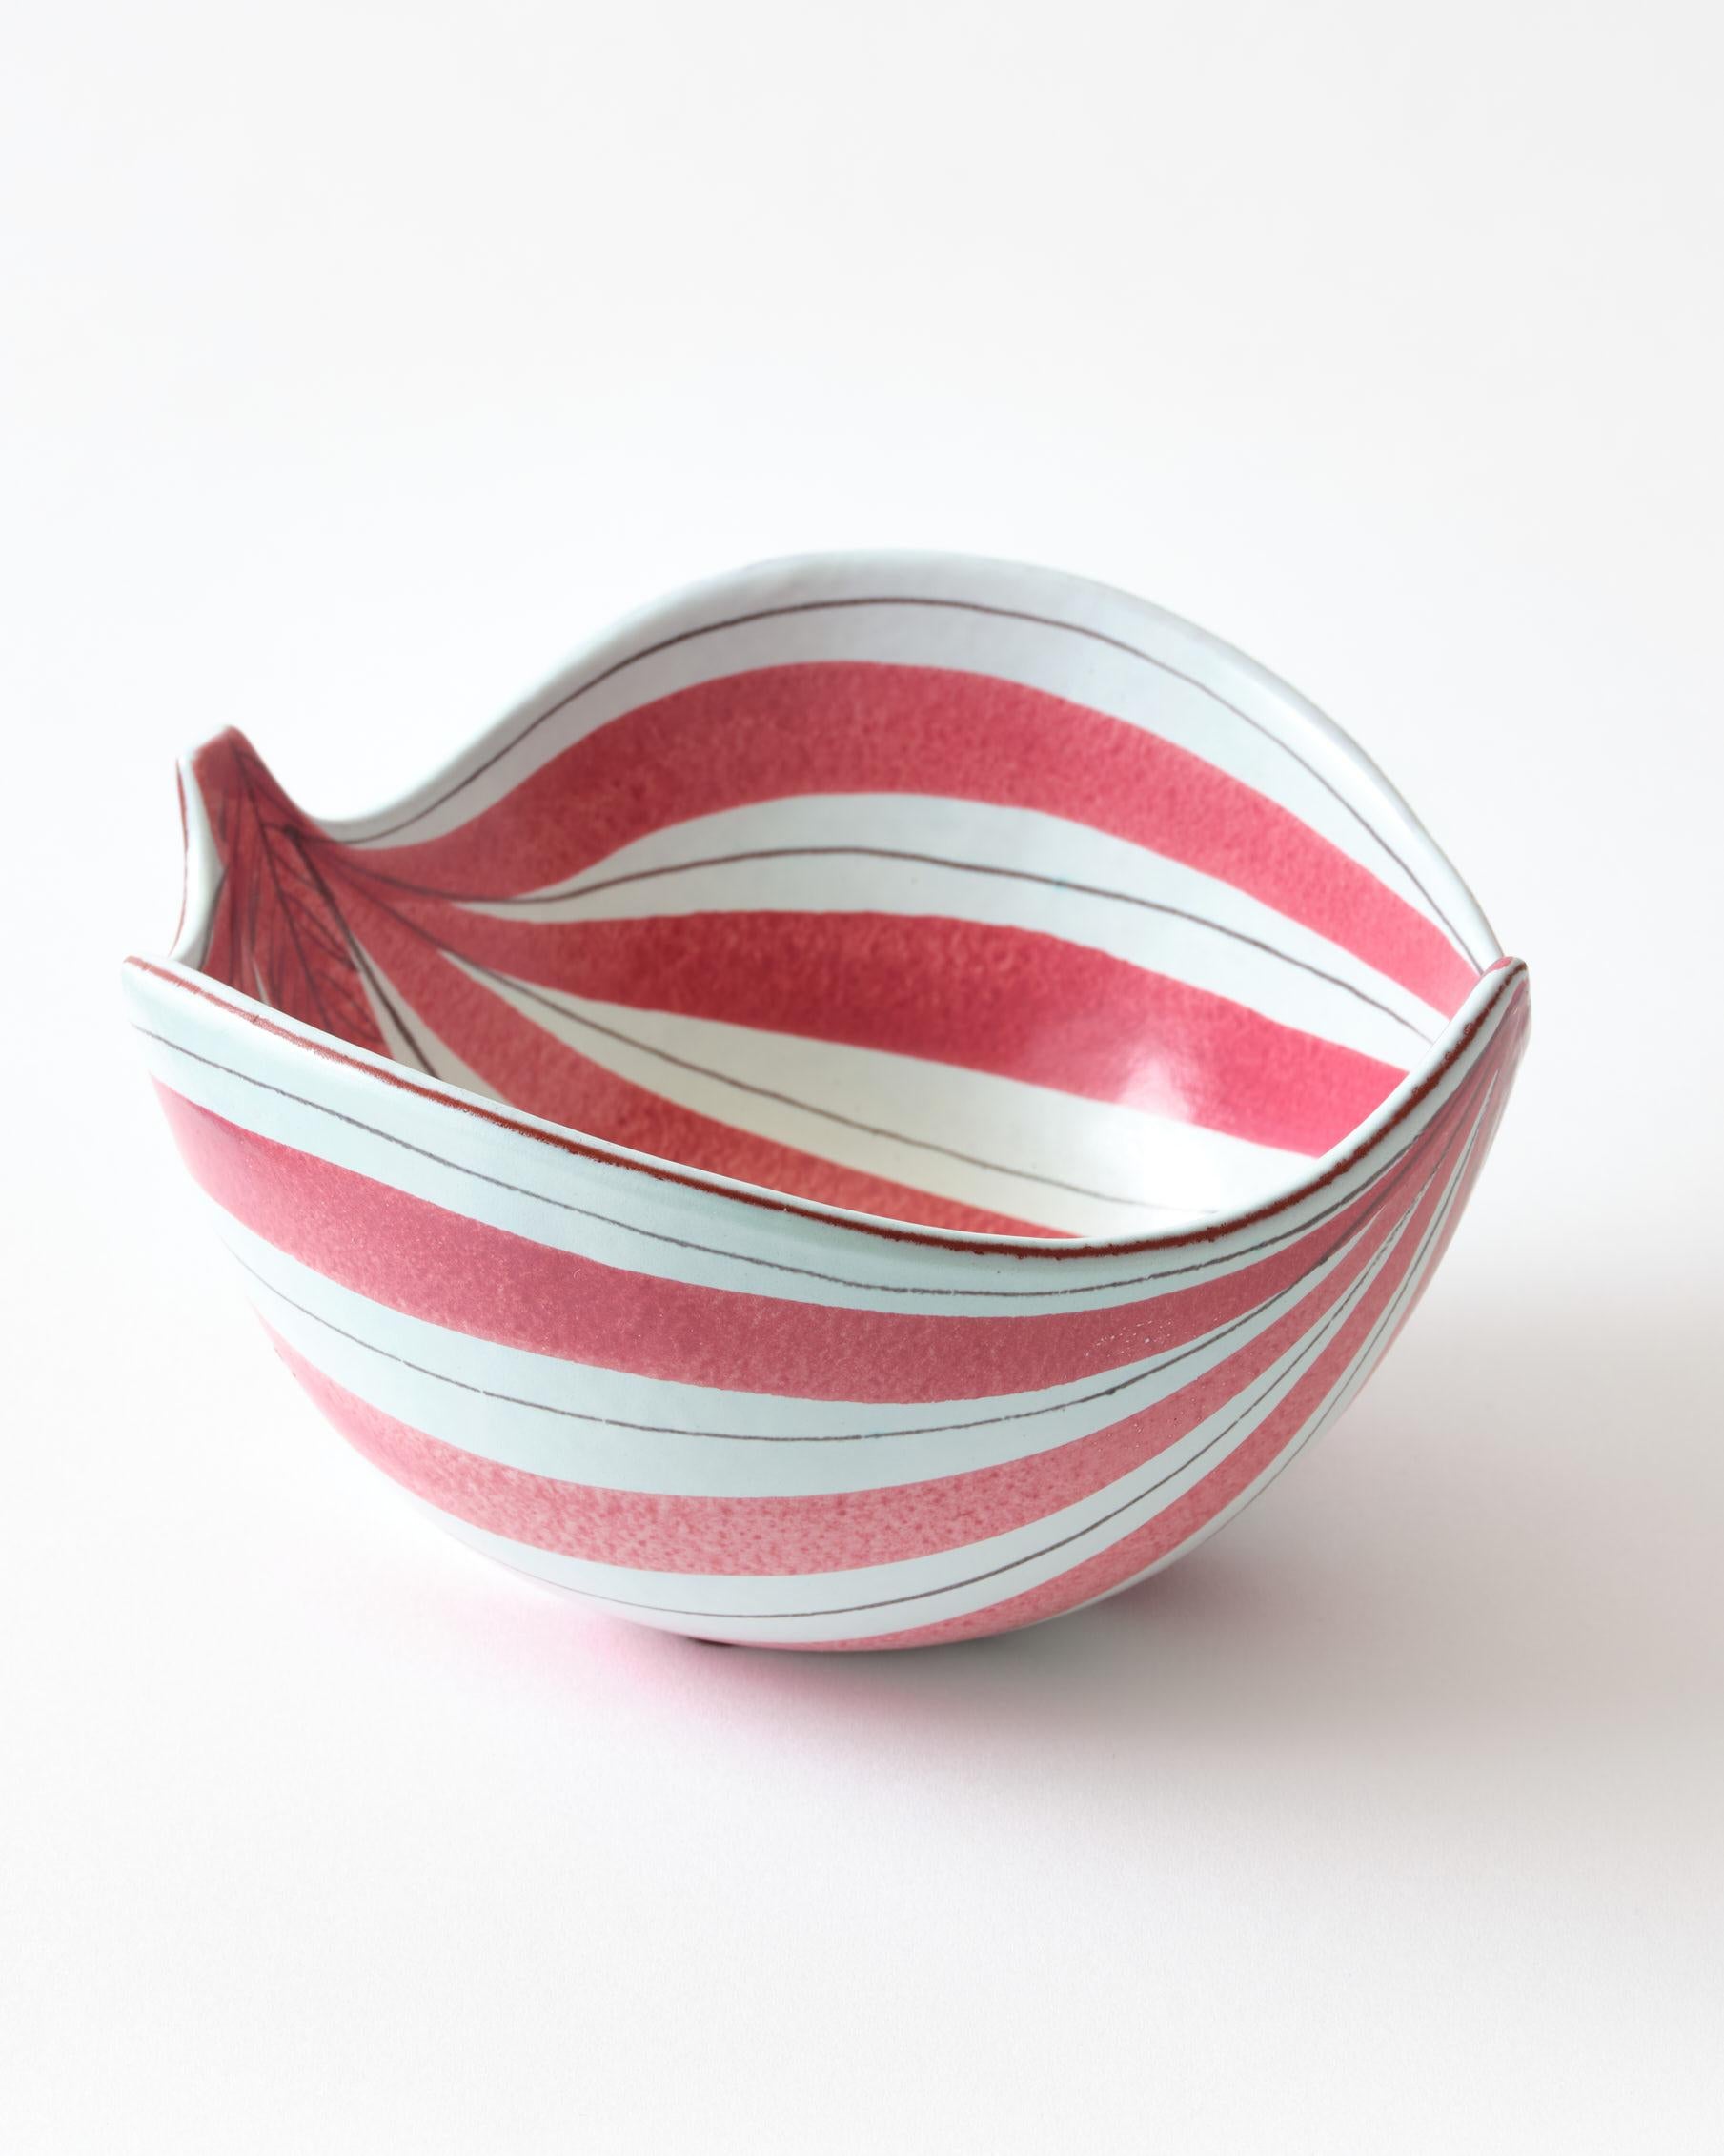 Hand-Crafted Ceramic Bowl by Stig Lindberg, Sweden, Red & White Striped, Signed, C 1950 For Sale